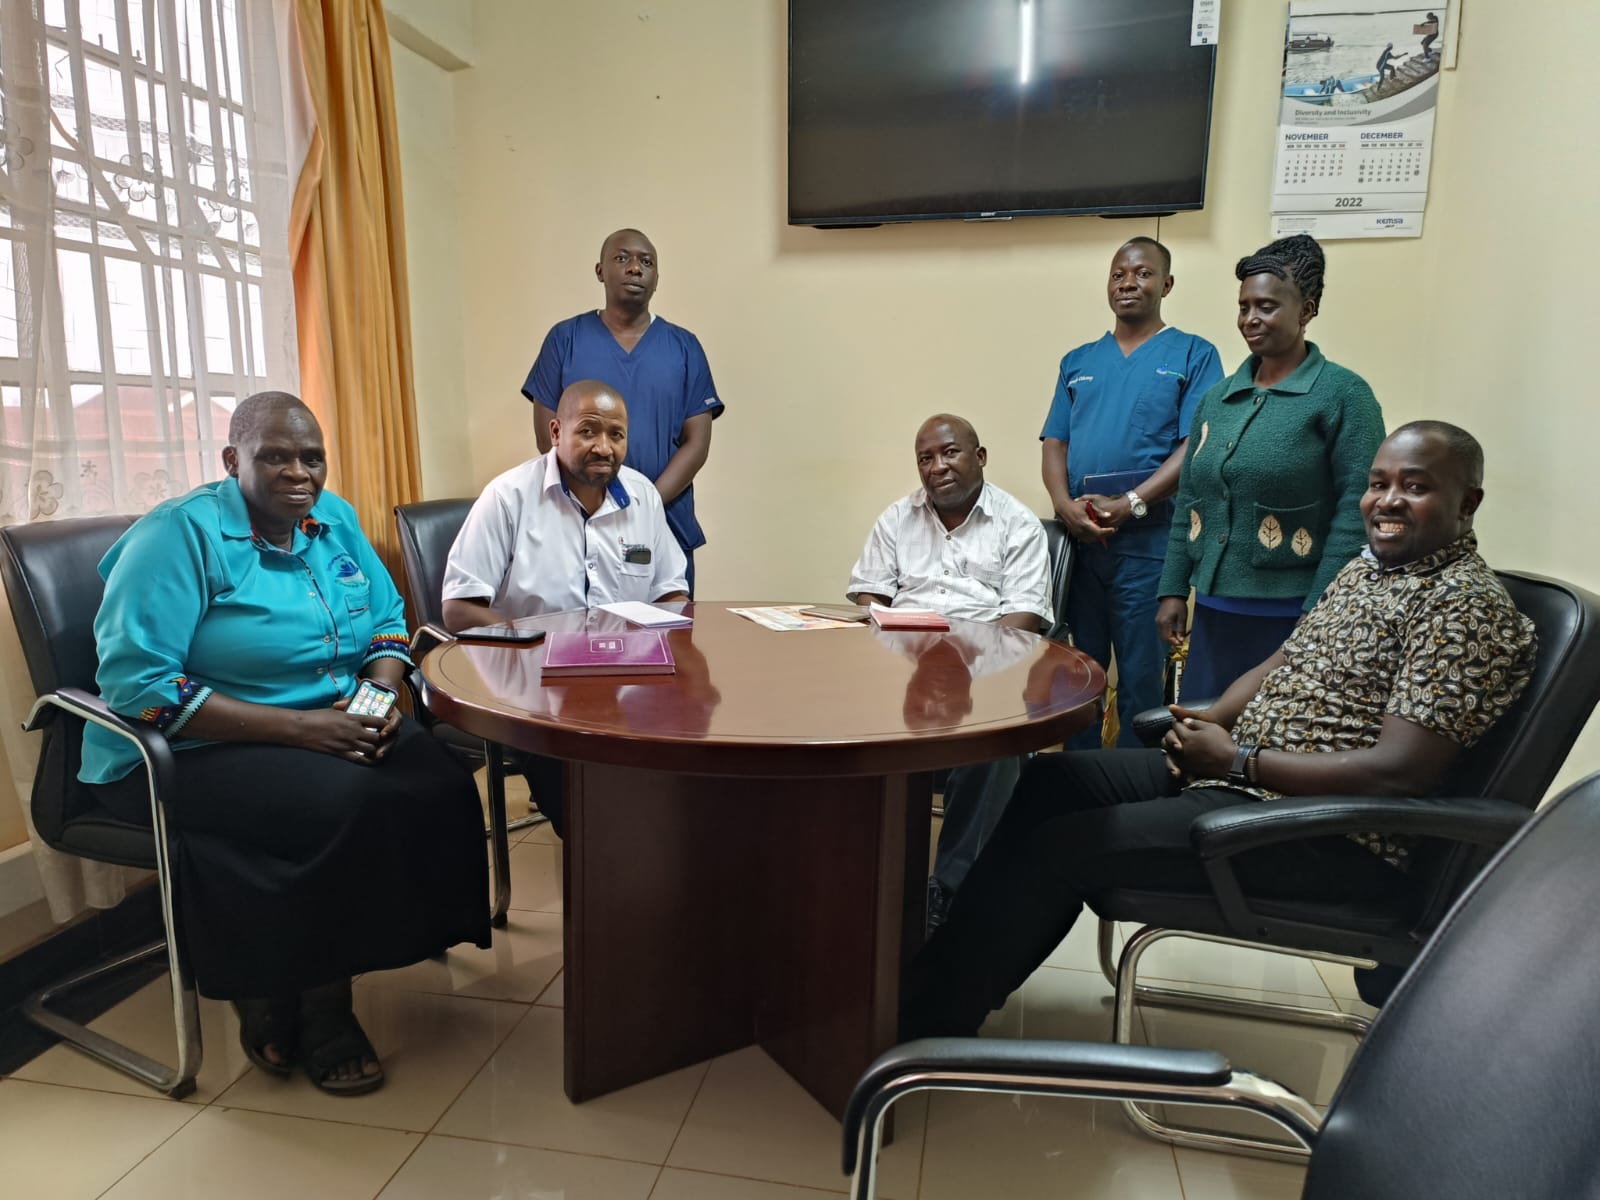 Nyamira County Health Executive Dr.Timothy Ombati Mokua (R) poses in a photo with partners from the International Cancer Institute in his office.